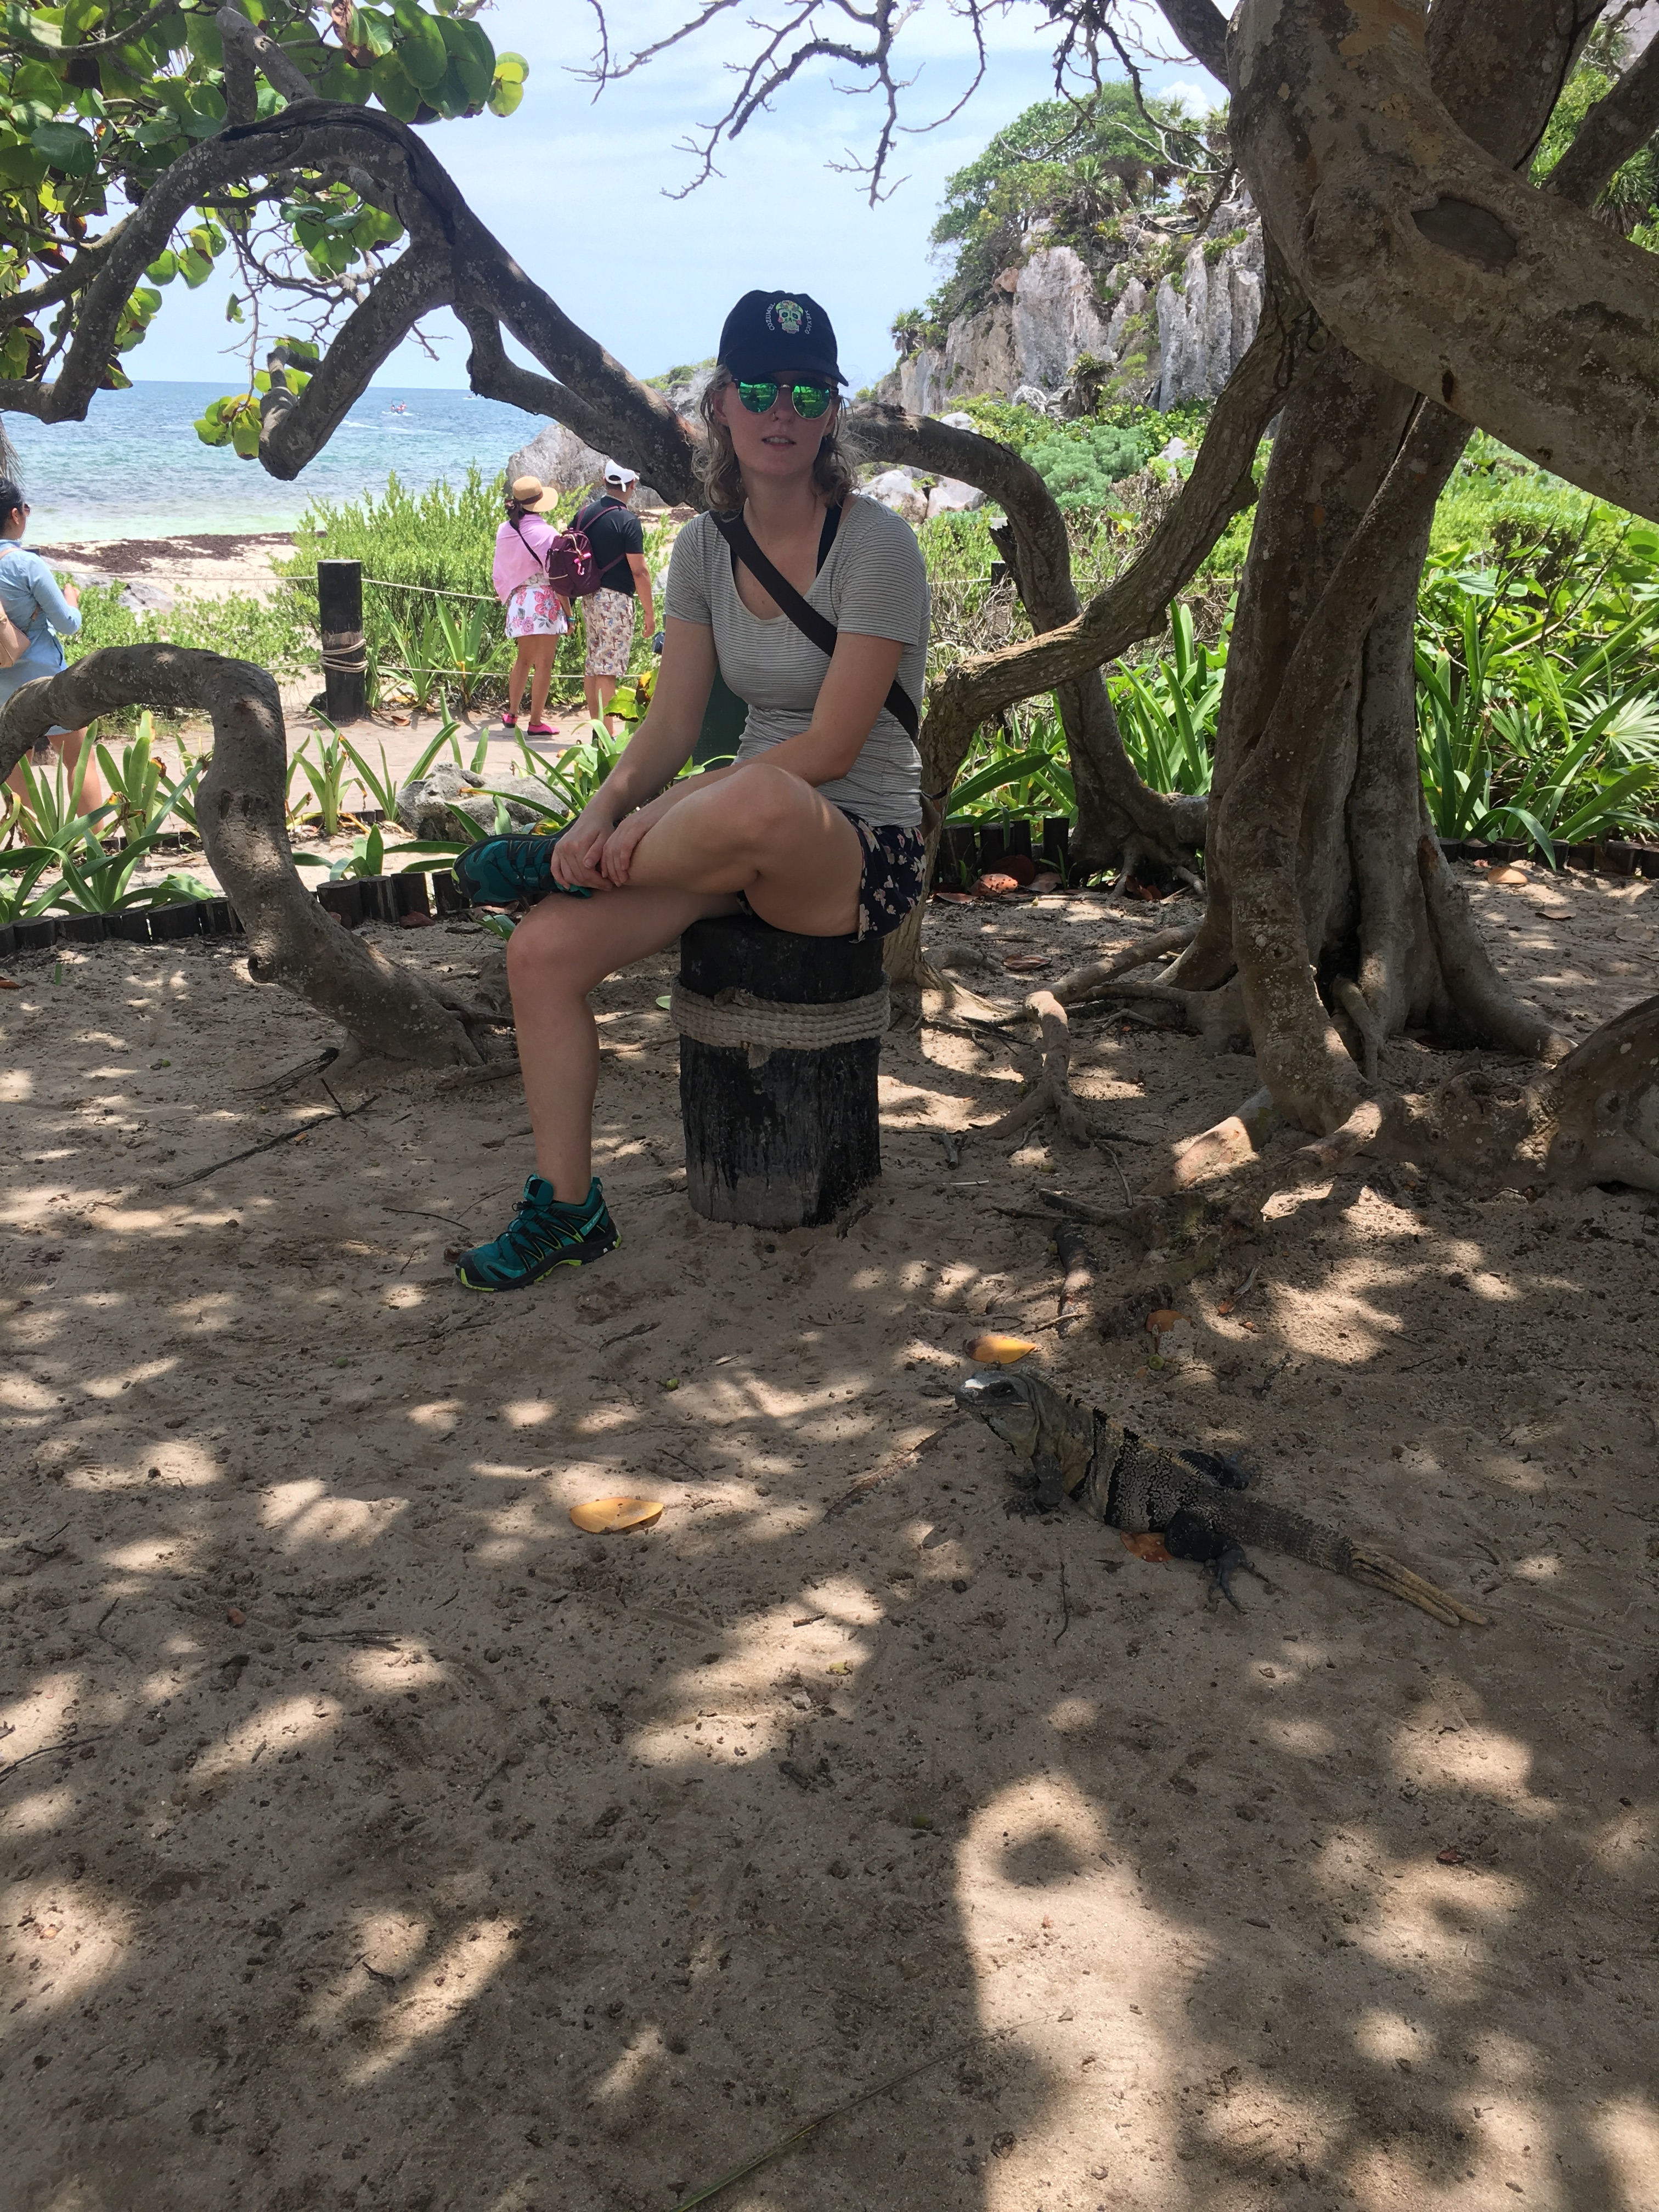 Woman sitting on a log of wood, looking at an iguana.